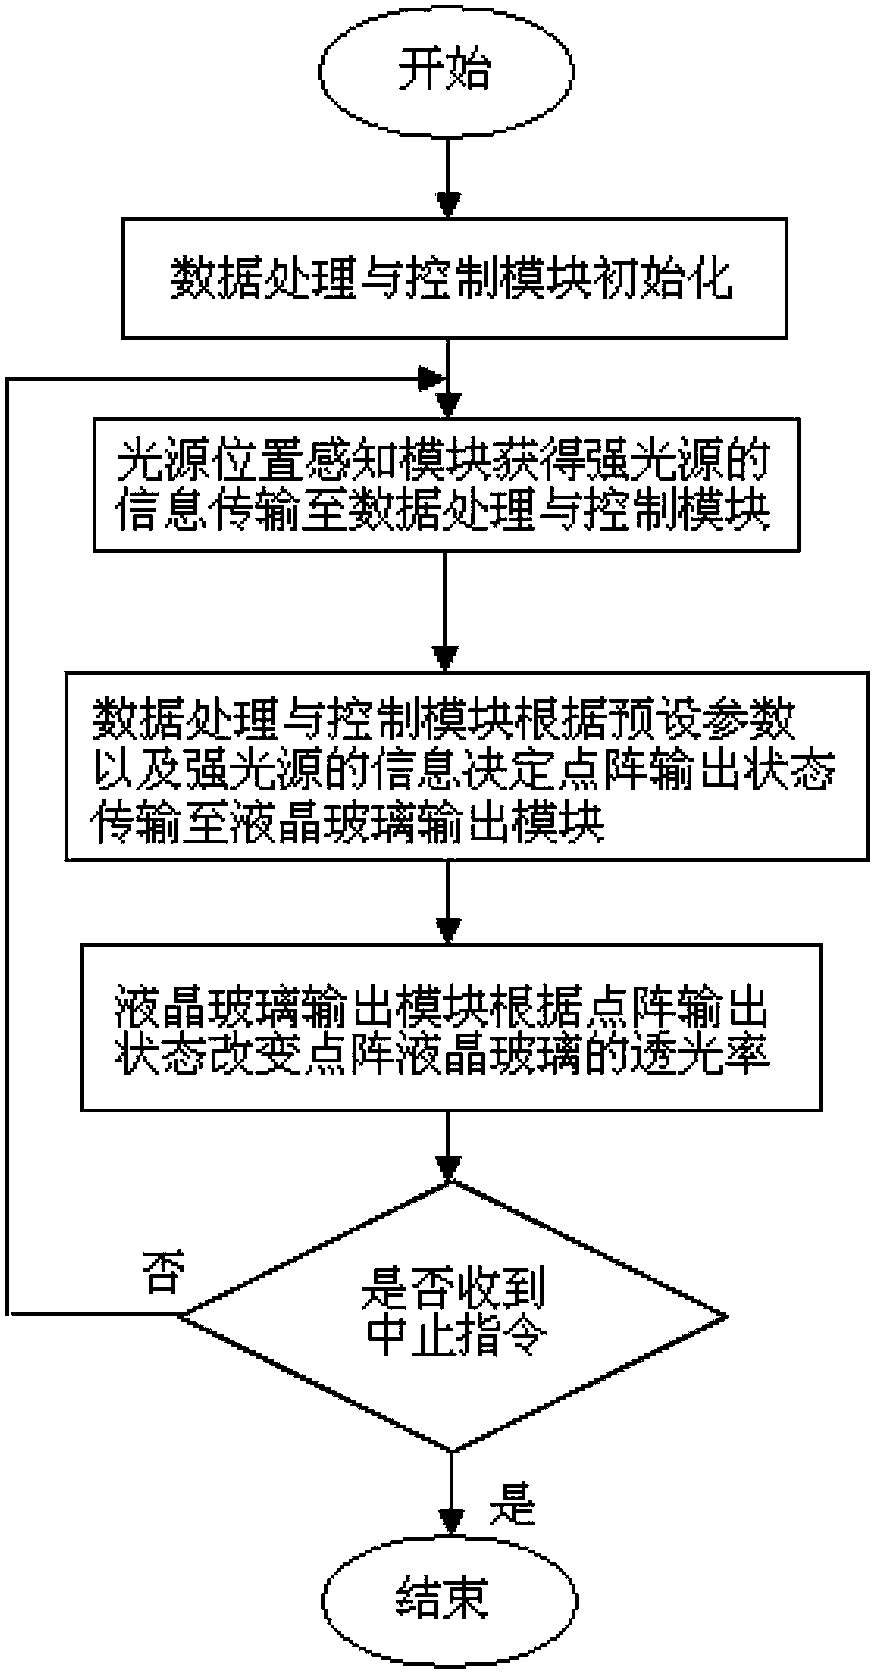 Anti-dazzling driving auxiliary system based on liquid crystal glass and anti-dazzling method of anti-dazzling driving auxiliary system